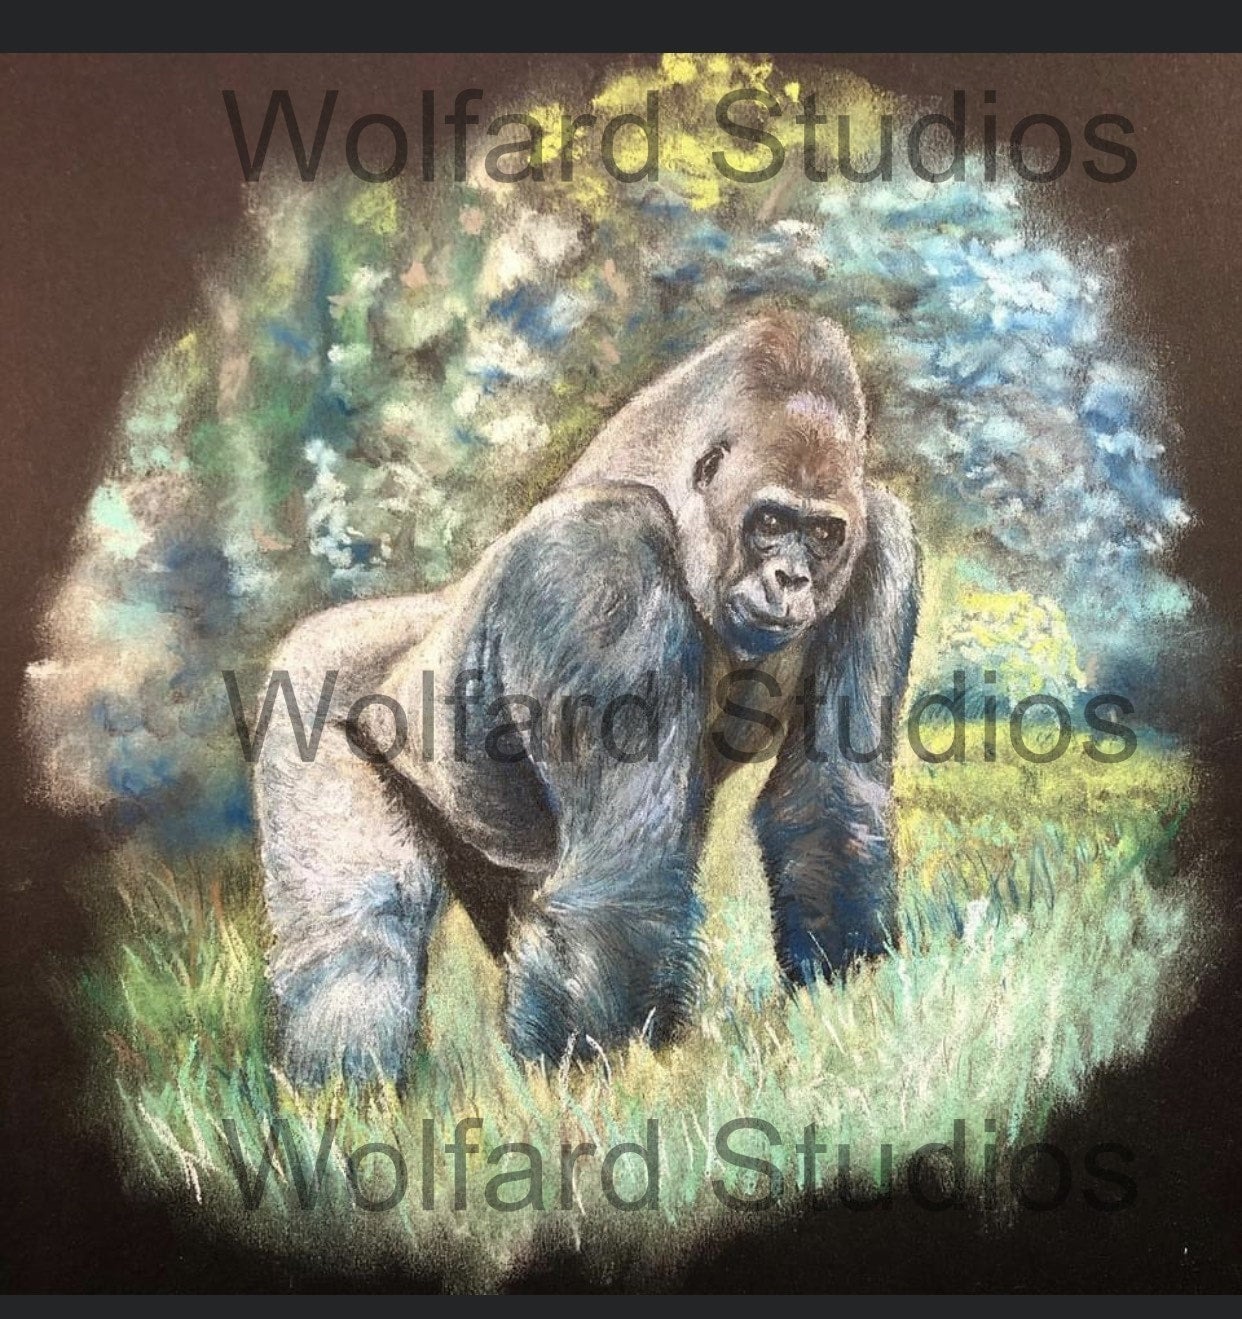 Silverback Gorilla Guardian of the Rainforest Rug by Holbrook Art  Productions